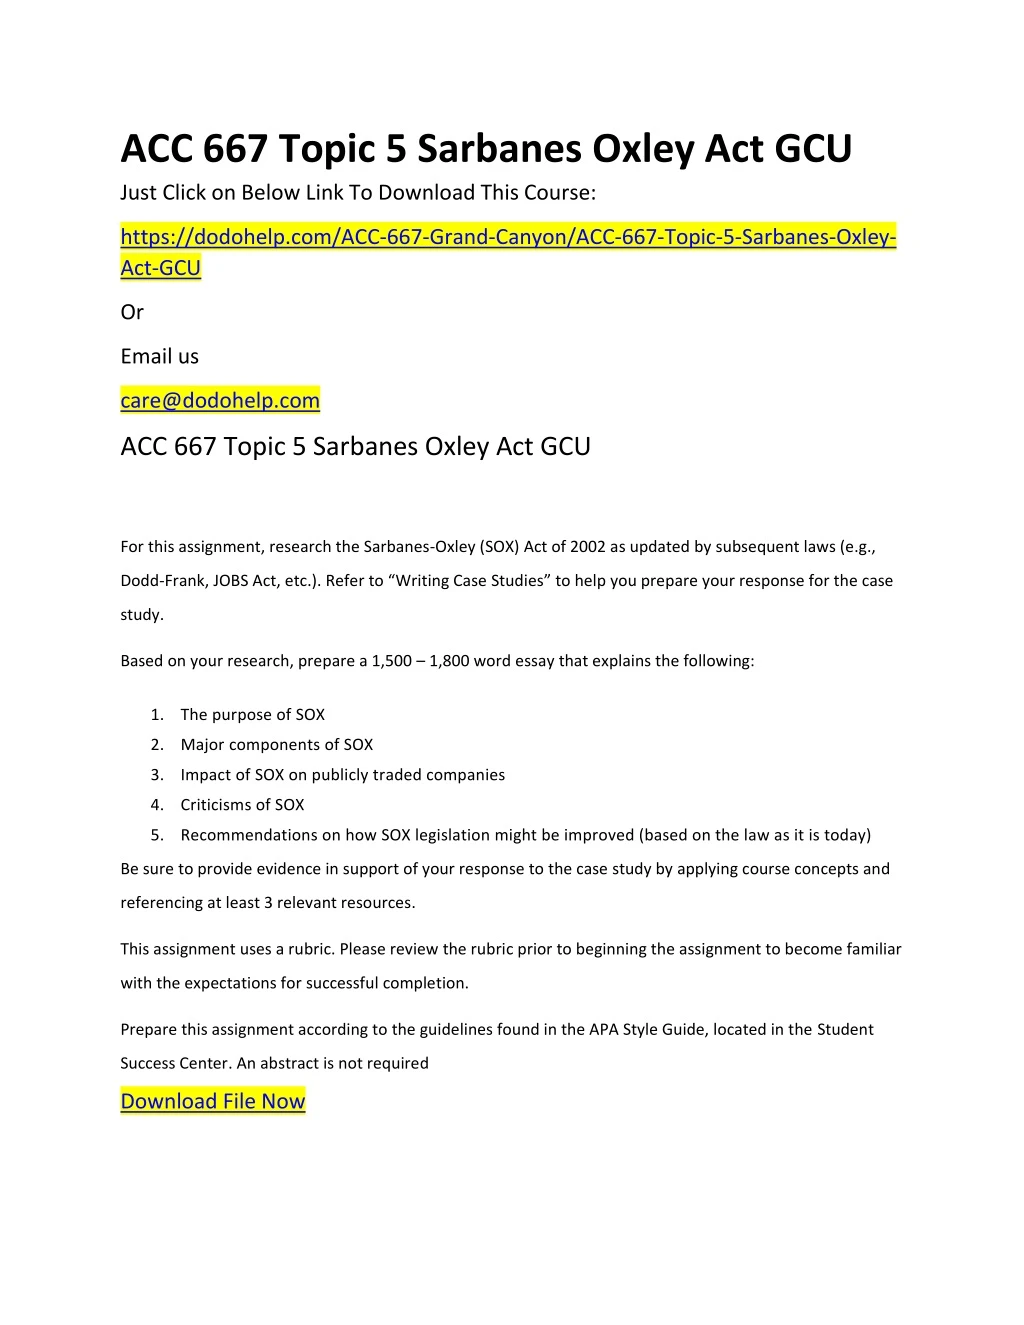 acc 667 topic 5 sarbanes oxley act gcu just click